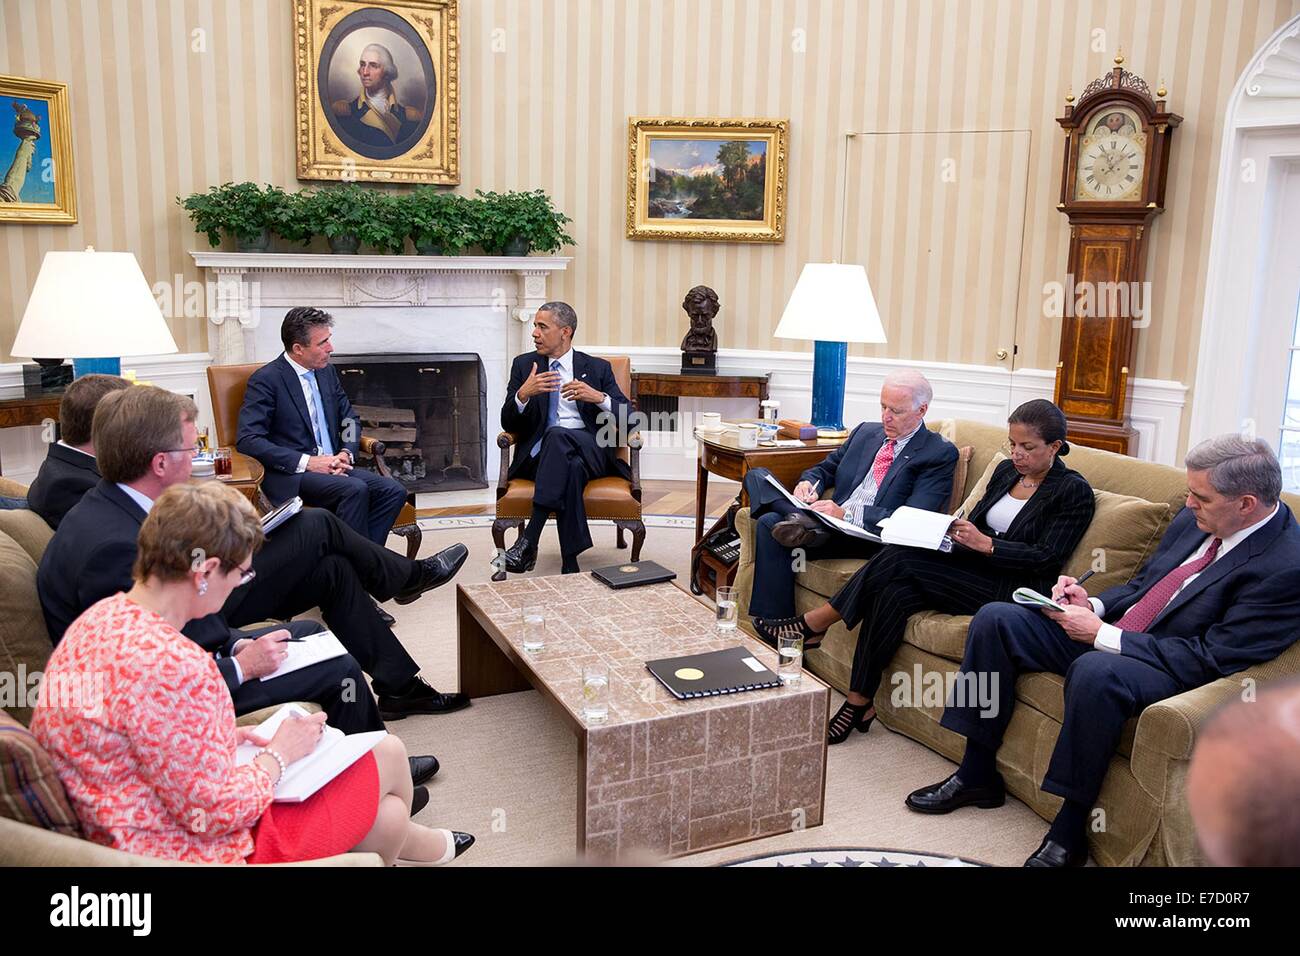 US President Barack Obama and Vice President Joe Biden meet with NATO Secretary General Anders Fogh Rasmussen to discuss the situation in Ukraine in the Oval Office of the White House July 8, 2014 in Washington, DC.  Seated at right are National Security Advisor Susan E. Rice and Doug Lute, U.S. Ambassador to NATO. Stock Photo